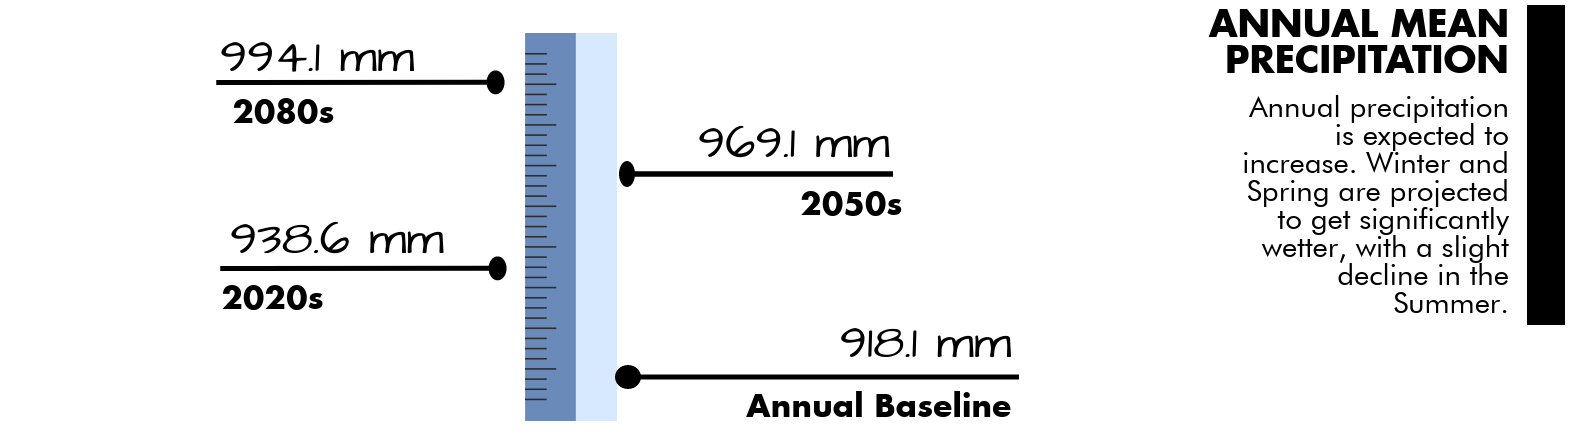 Annual baseline precipitation is 918 milimetres, by the 2050s precipitation estimated are 969 milimetres.